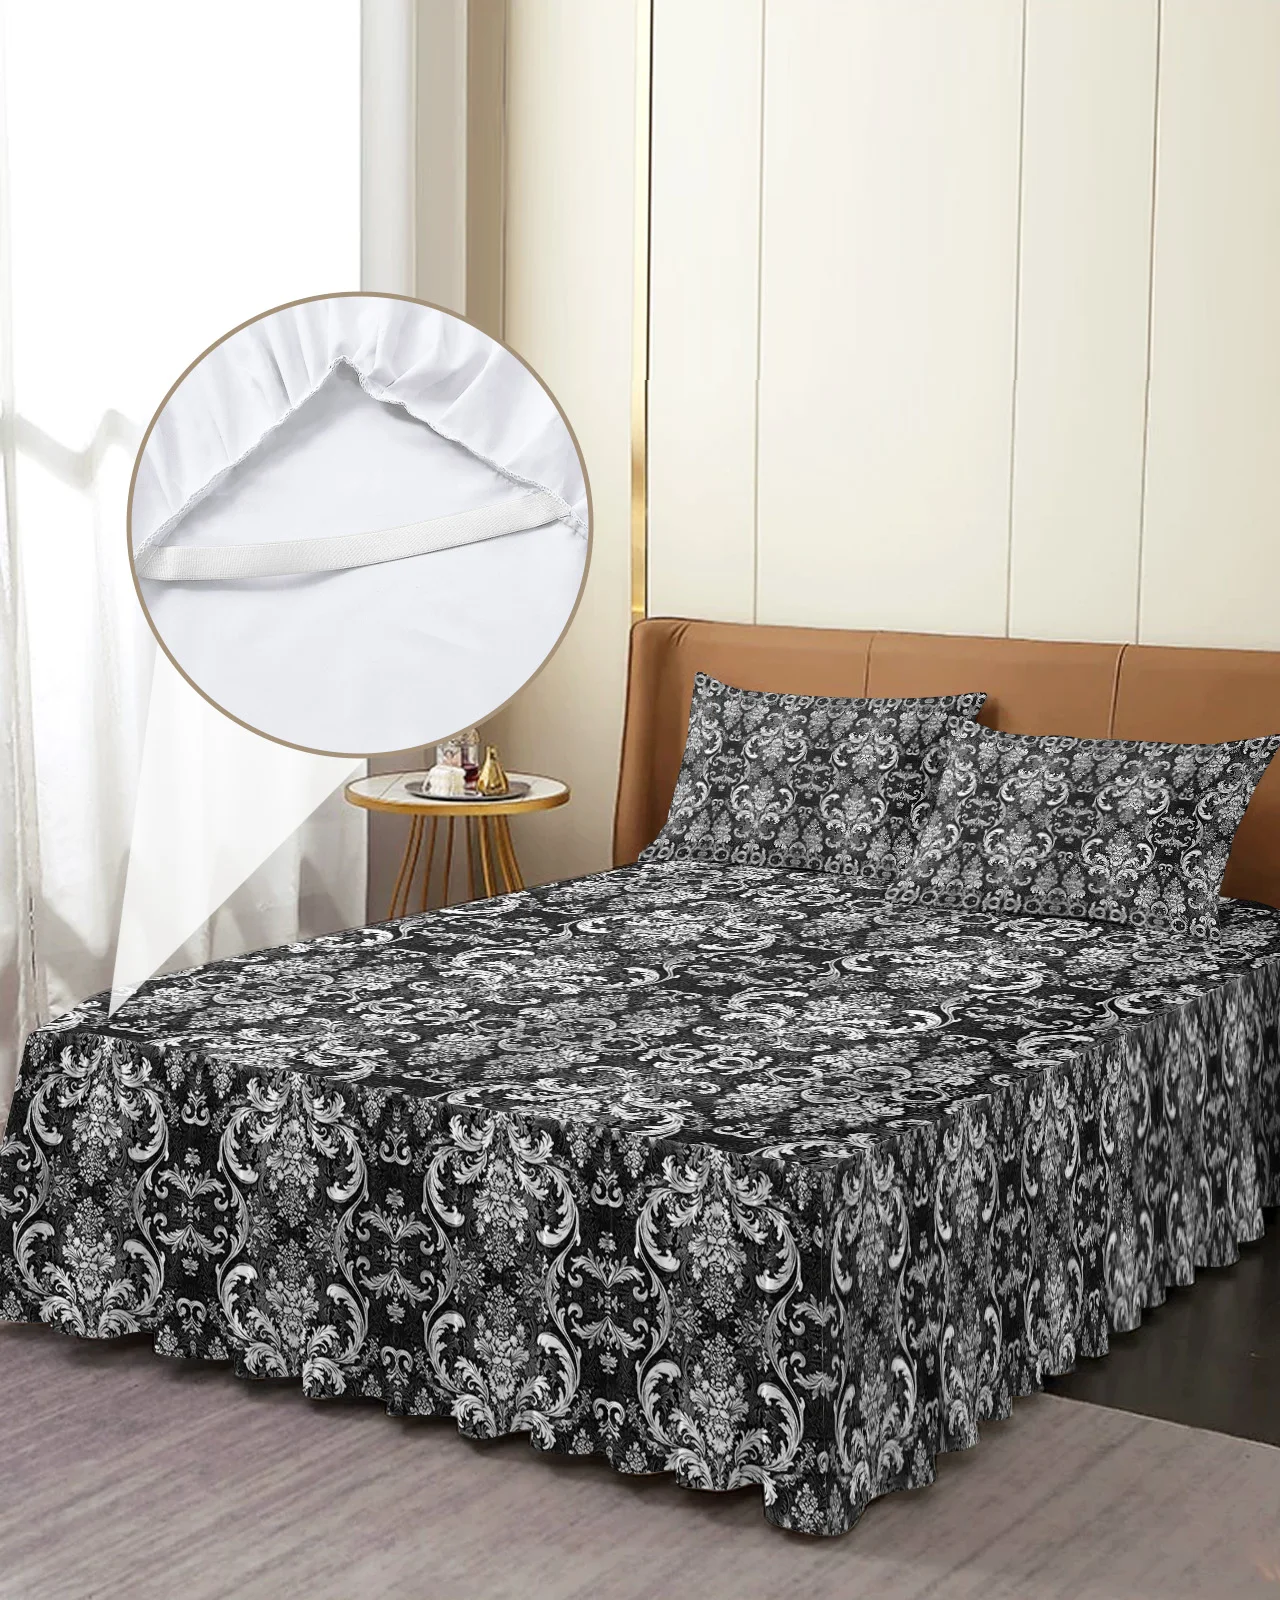 

Flower Texture Abstract Retro Bed Skirt Elastic Fitted Bedspread With Pillowcases Mattress Cover Bedding Set Bed Sheet